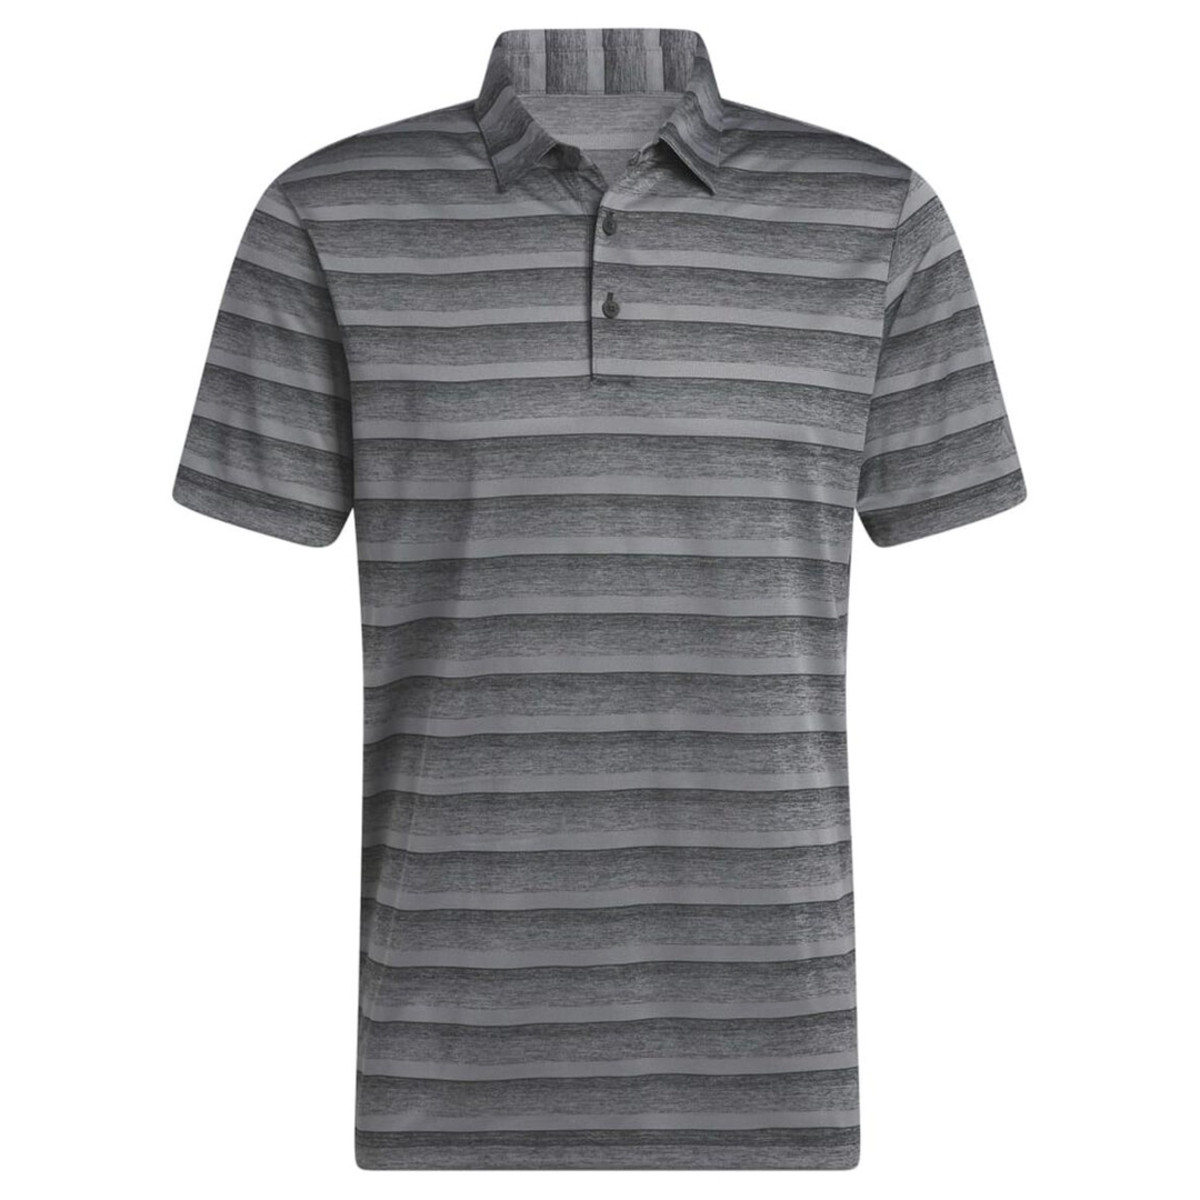 the adidas two color striped polo, seen here in black, is on sale at PGA Tour Superstore.